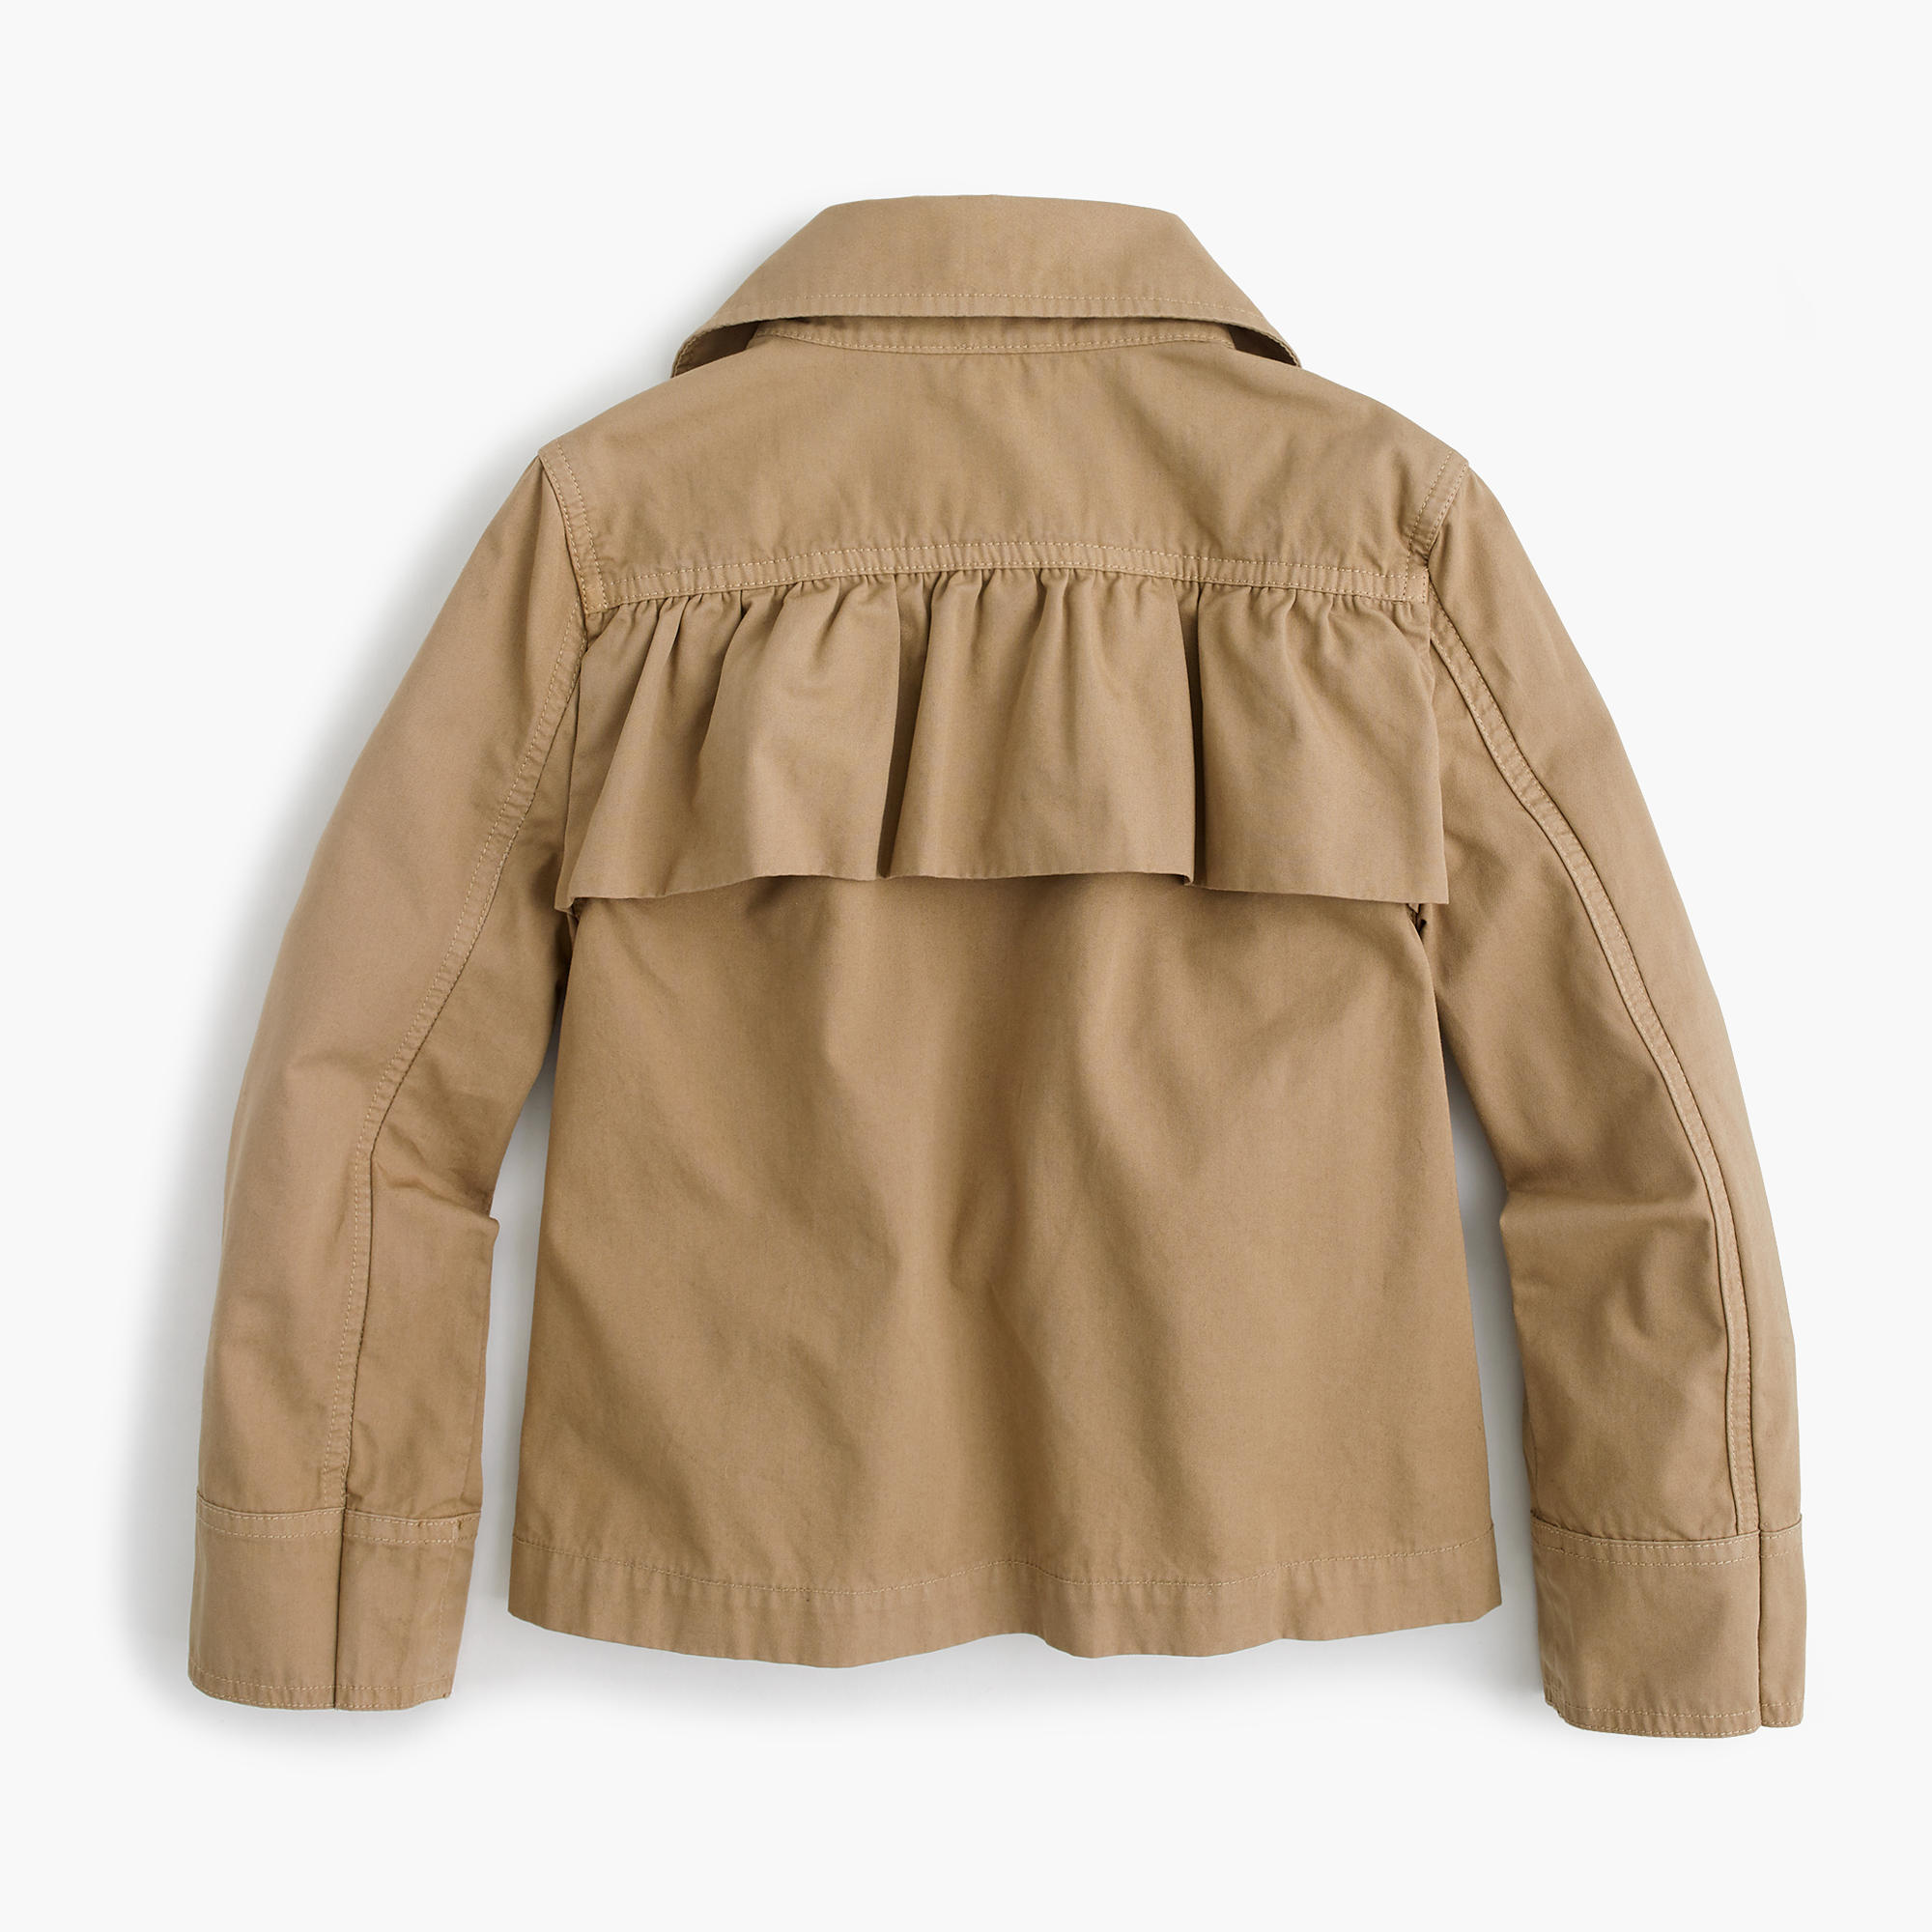 Girls&39 Jackets &amp Trench Coats : Girls&39 Outerwear | J.Crew